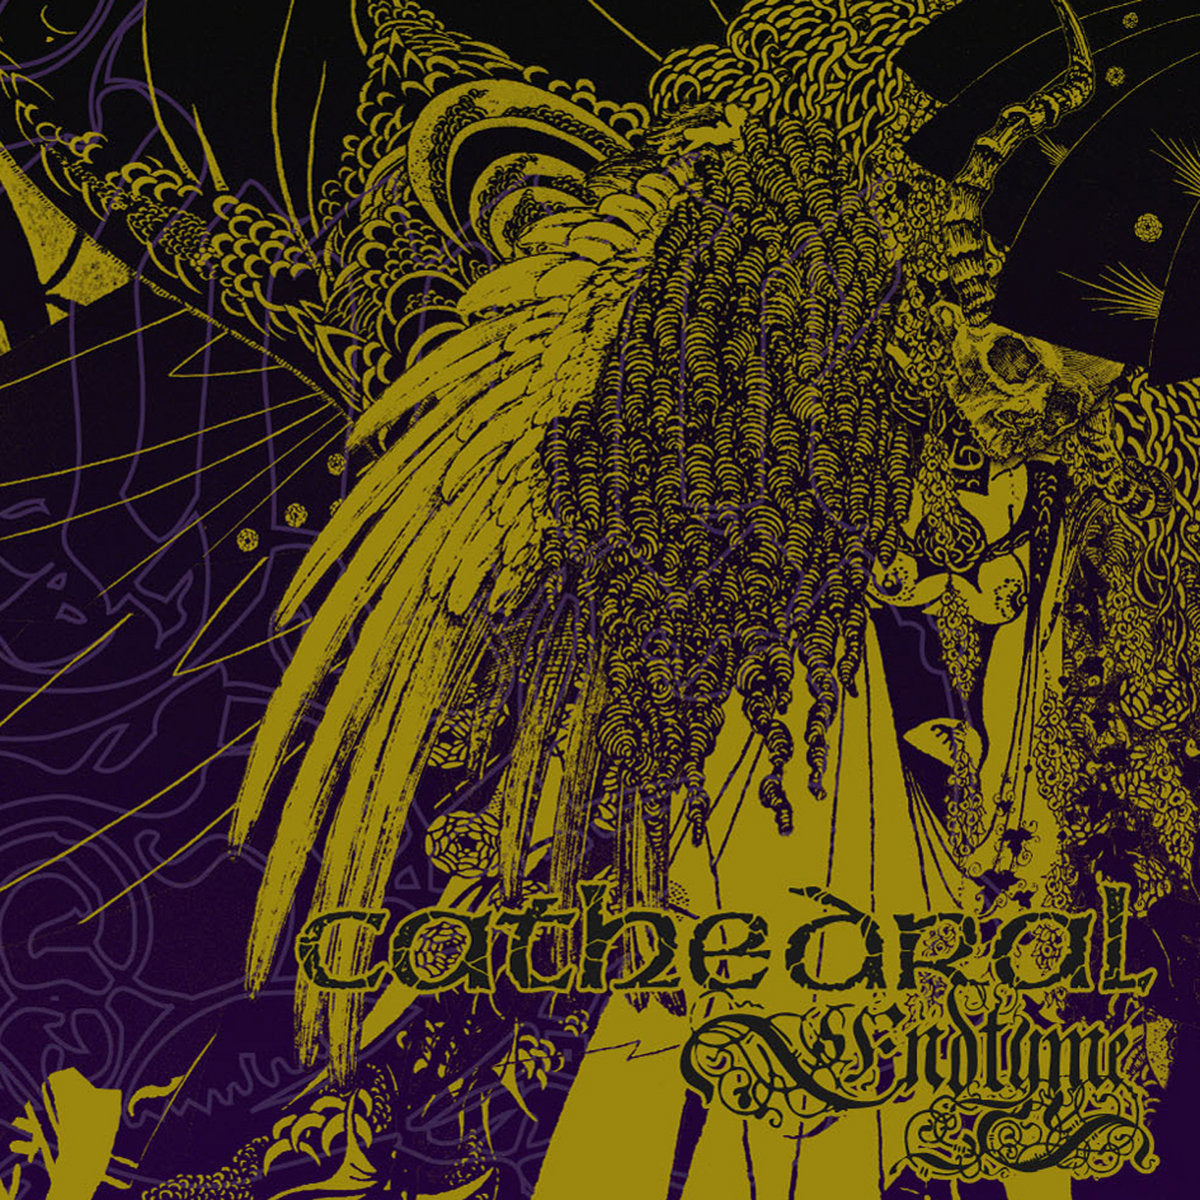 Cathedral "Endtyme" Gatefold 2x12" Black Vinyl - IN STOCK NOW!